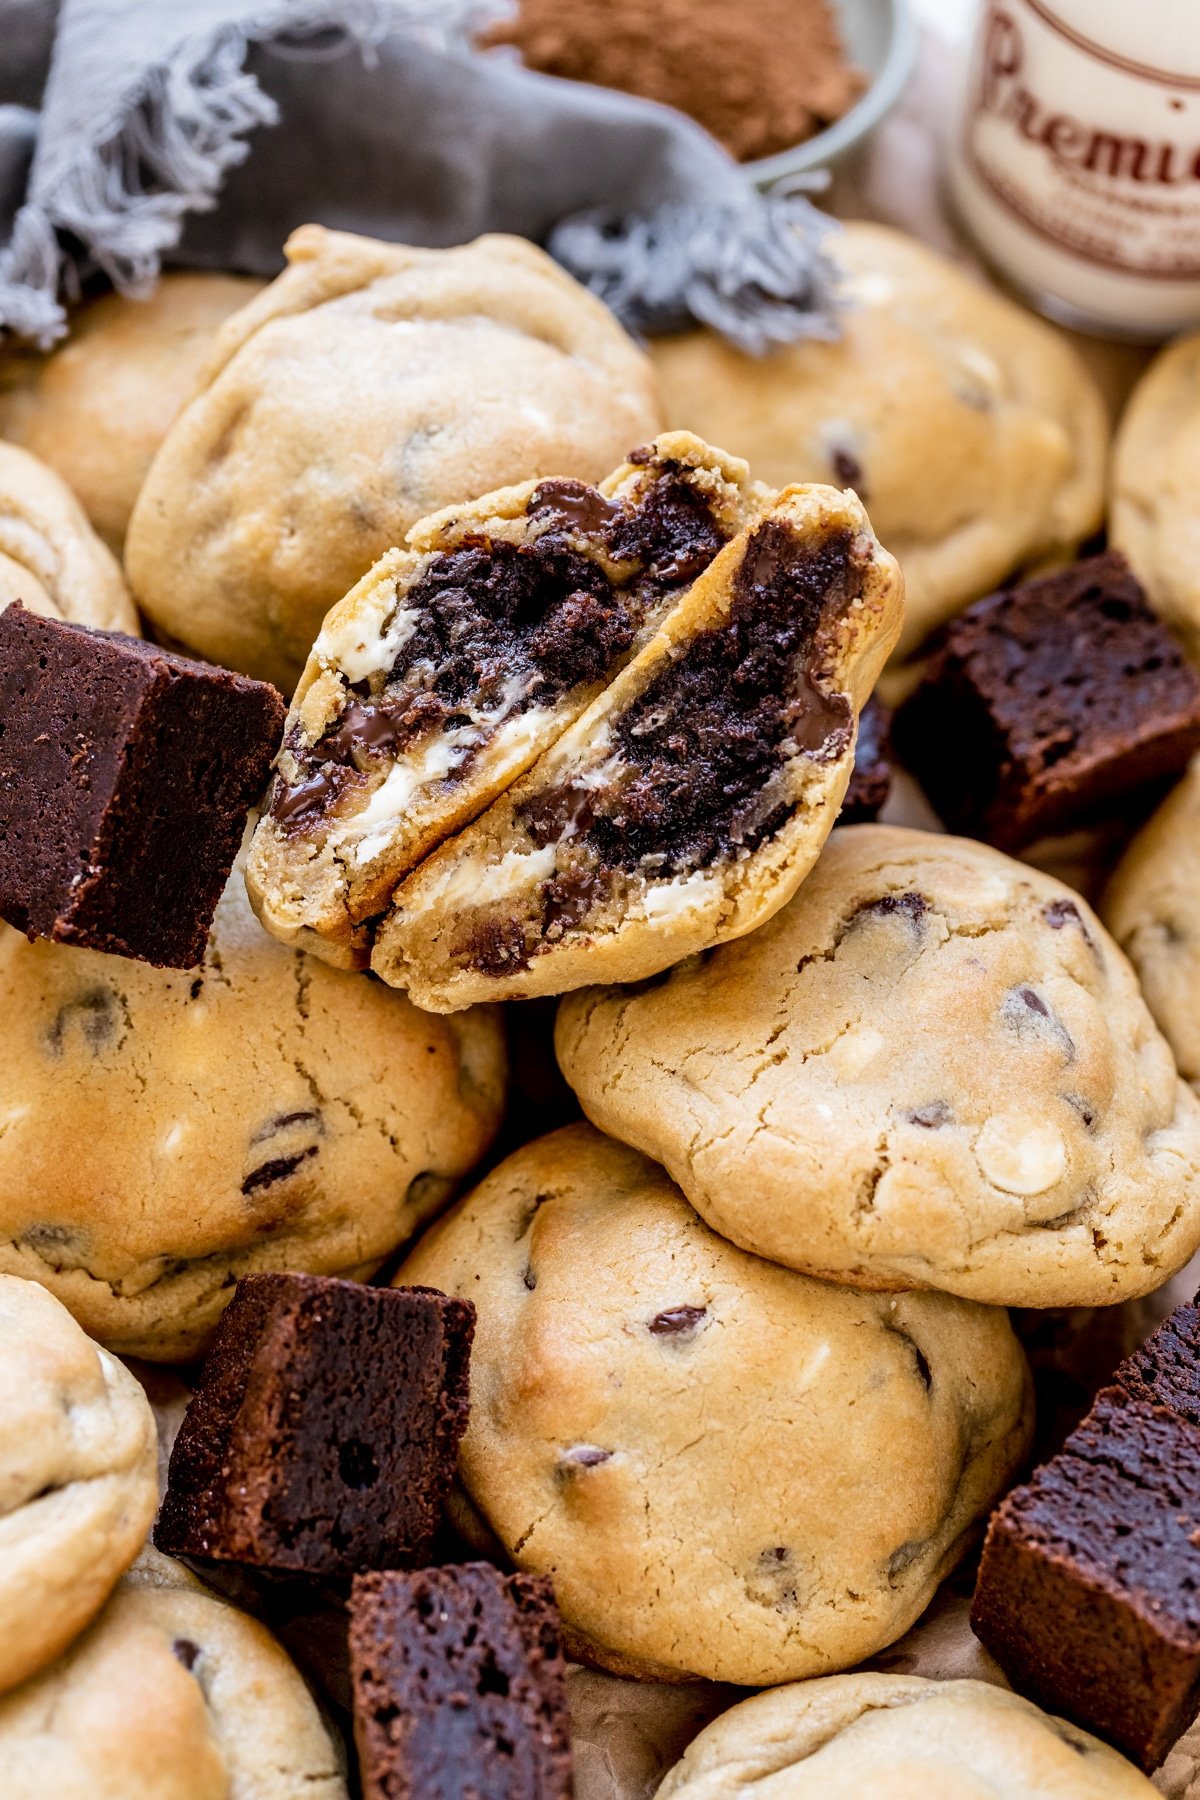 cookies stuffed with brownies in the middle.